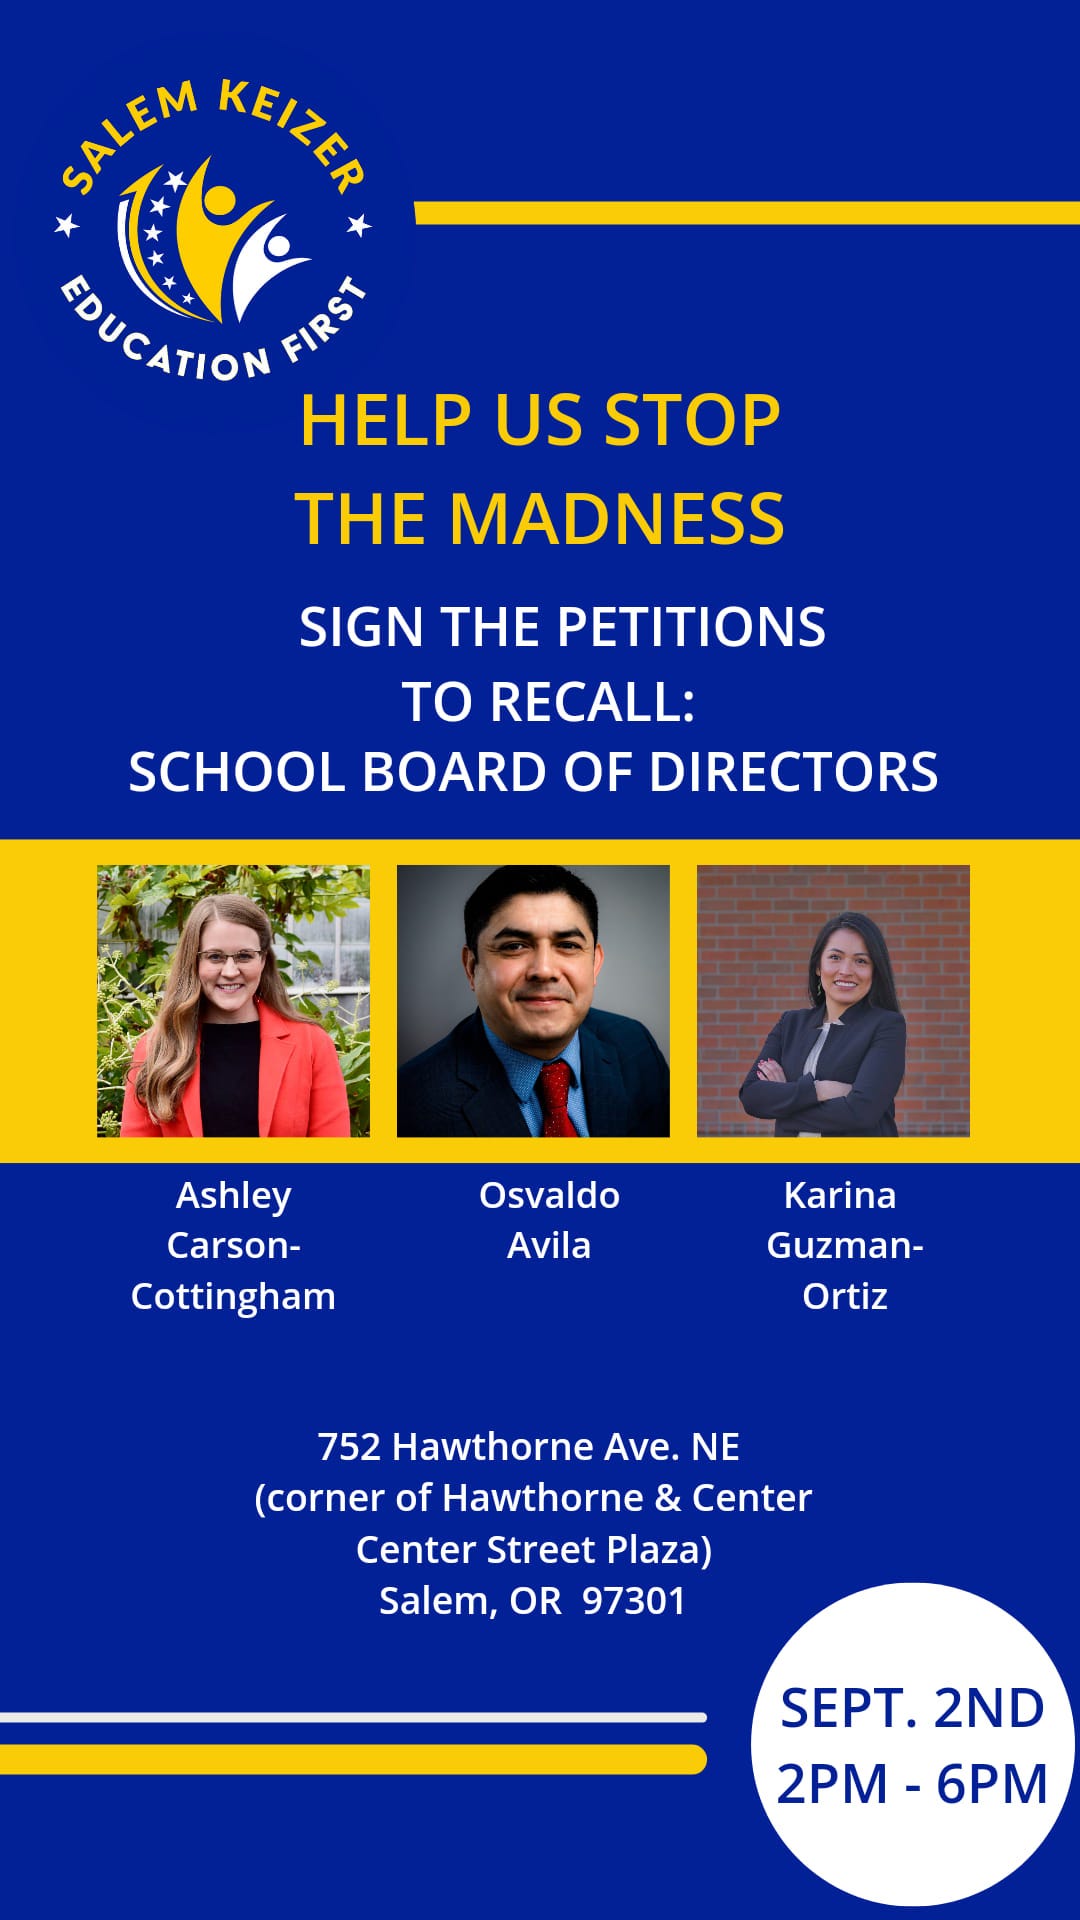 May be an image of 3 people and text that says 'SALEM KEIZER FOUCATION FIRST HELP US STOP THE MADNESS SIGN THE PETITIONS ΤΟ RECALL: SCHOOL BOARD OF DIRECTORS Ashley Carson- Cottingham Osvaldo Avila Karina Guzman- Ortiz 752 Hawthorne Ave. NE (corner of Hawthorne & Center Center Street Plaza) Salem, OR 97301 SEPT. 2ND 2PM -6PM'